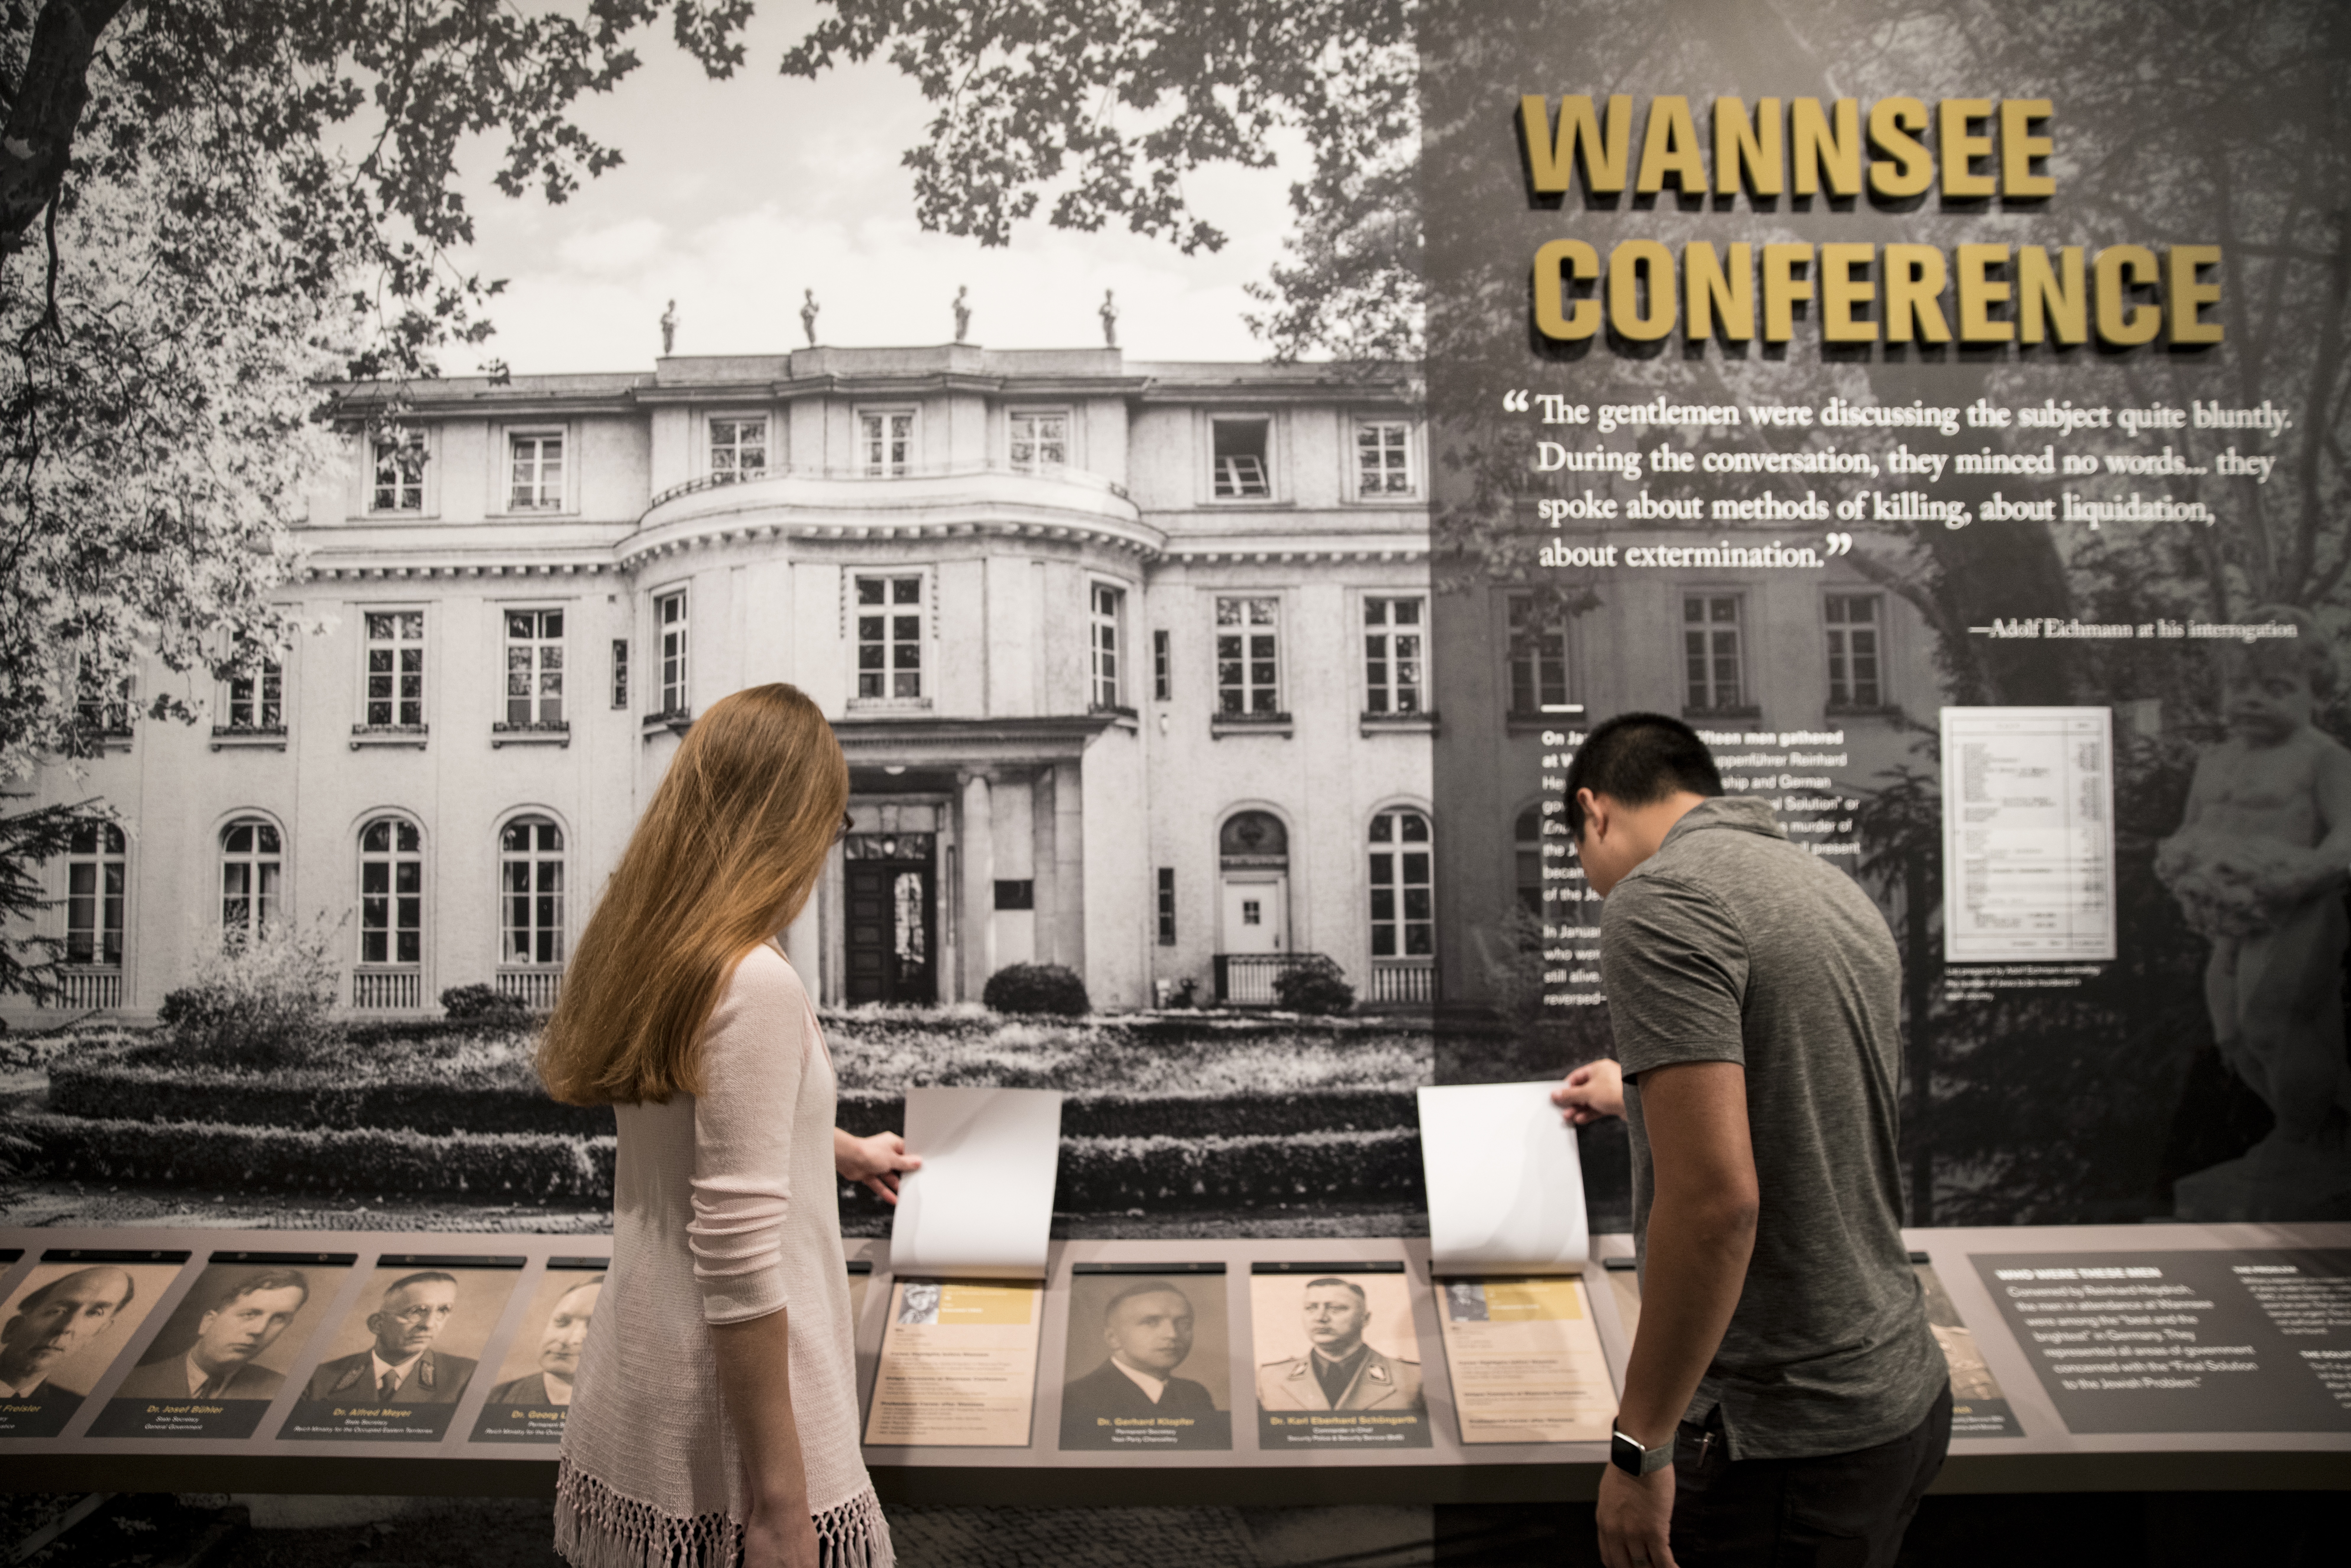 Planning the Holocaust: The Impact of the Wannsee Conference